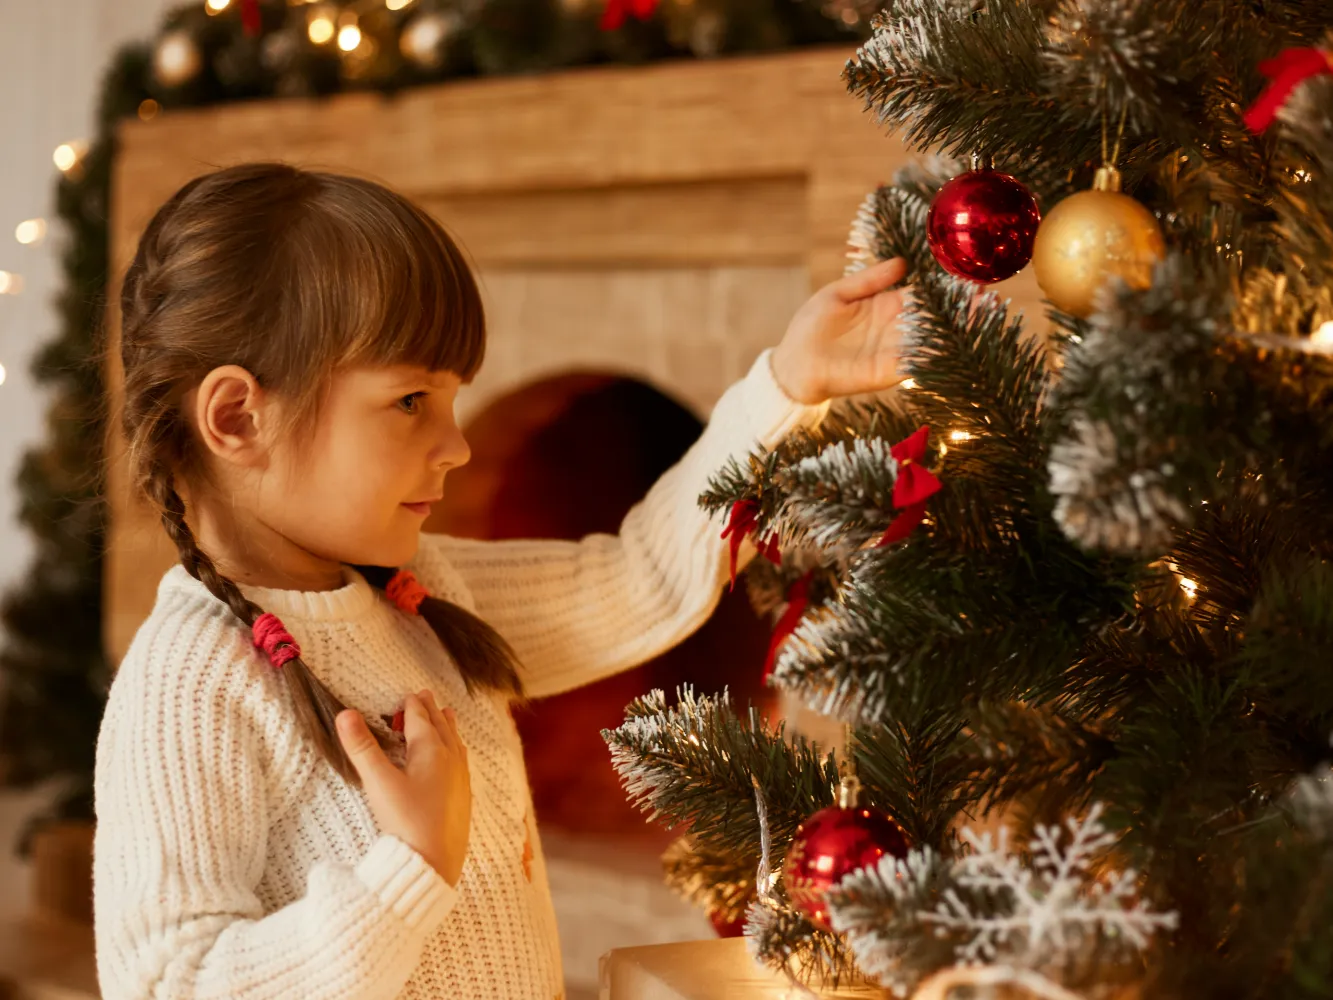 side-view-portrait-charming-little-girl-with-pigtails-decorating-christmas-tree-alone-wearing-white-sweater-standing-living-room-near-fireplace